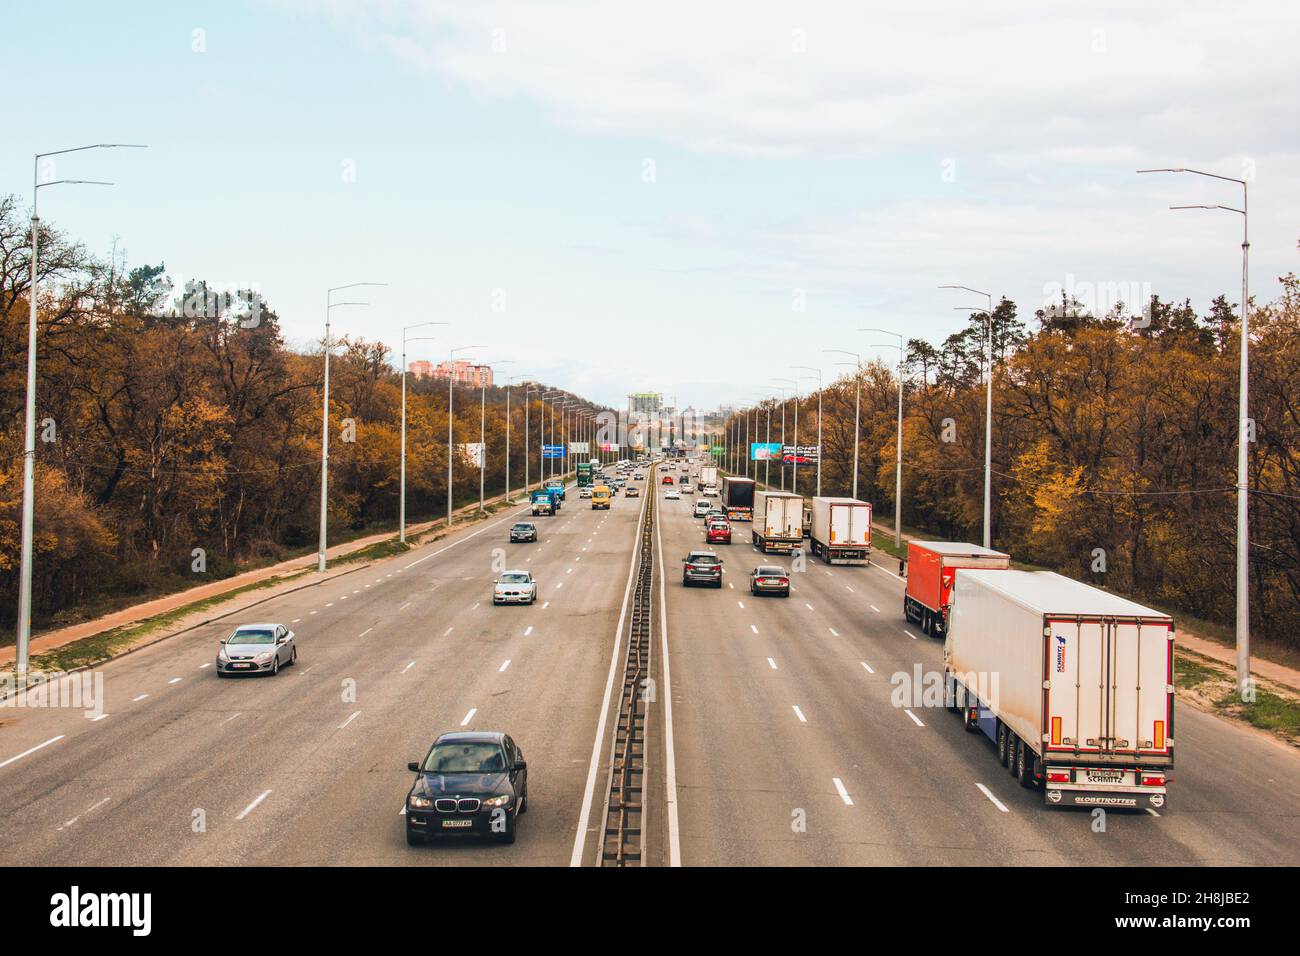 Kiev, Ukraine - April 21, 2020: Freeway. Cars are driving along the road. Two-way traffic. Stock Photo